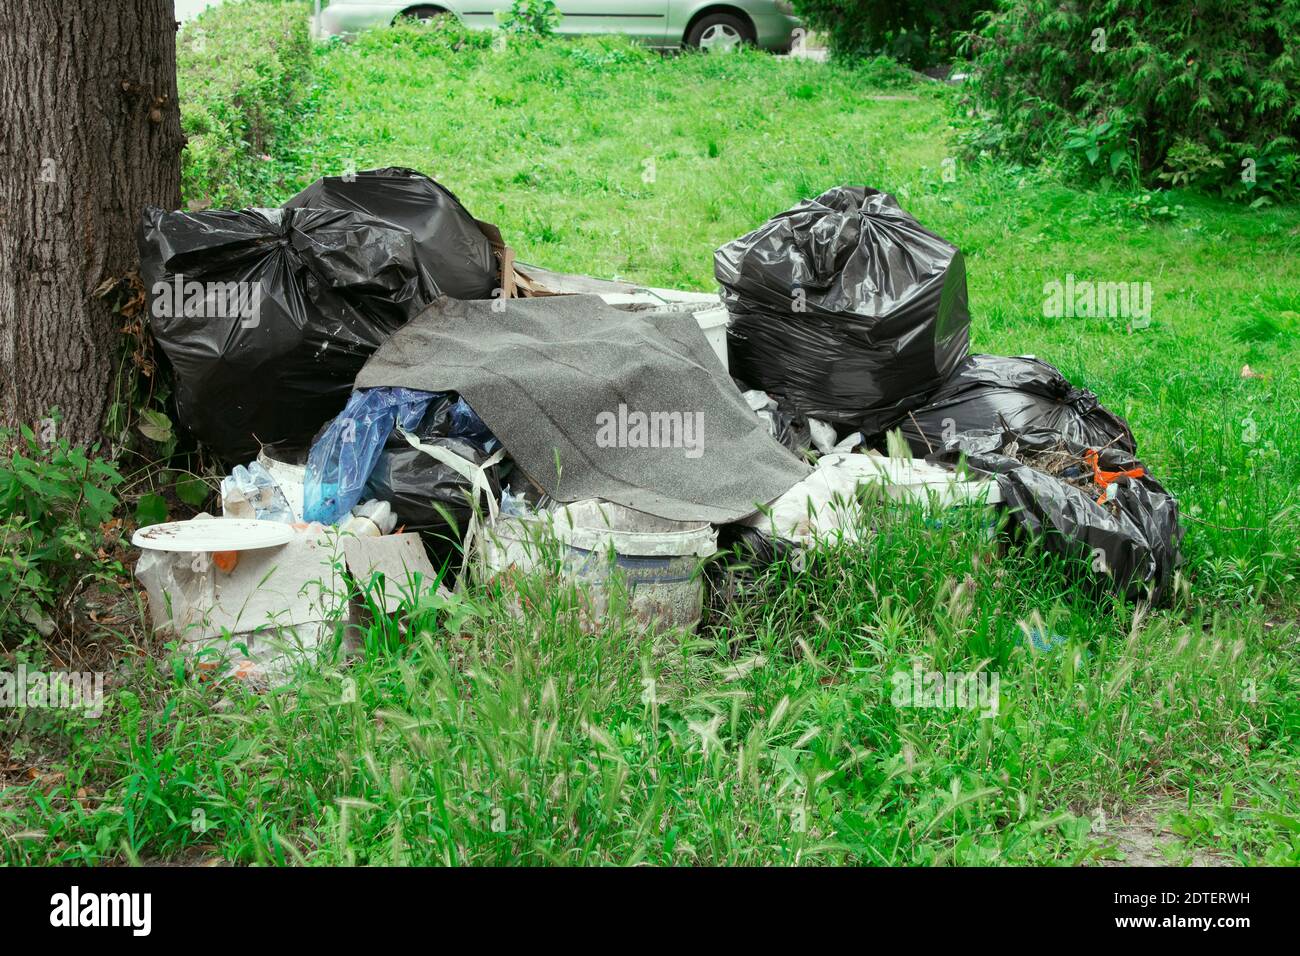 https://c8.alamy.com/comp/2DTERWH/garbage-in-black-bags-under-a-tree-in-the-city-2DTERWH.jpg